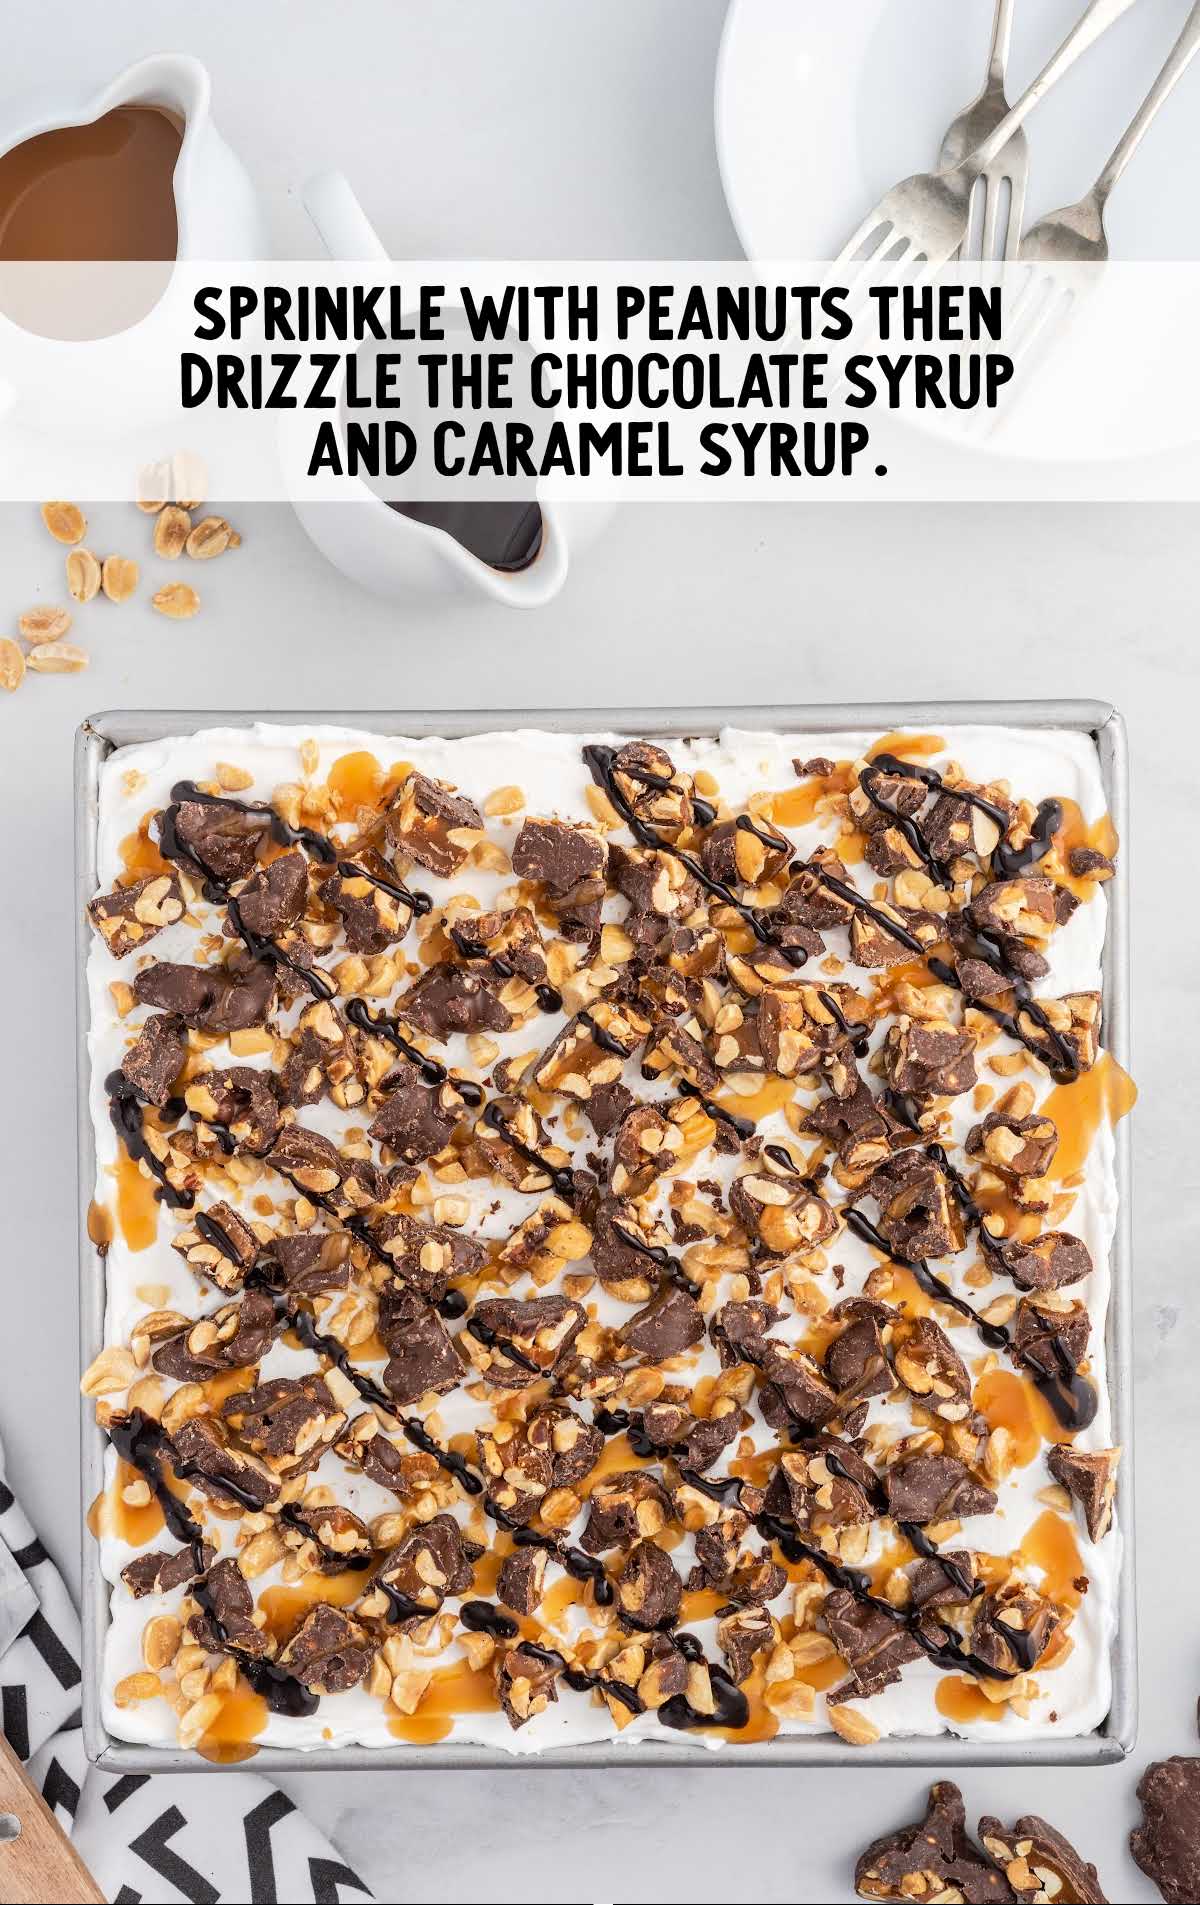 peanuts sprinkled and chocolate syrup and caramel syrup drizzled on top